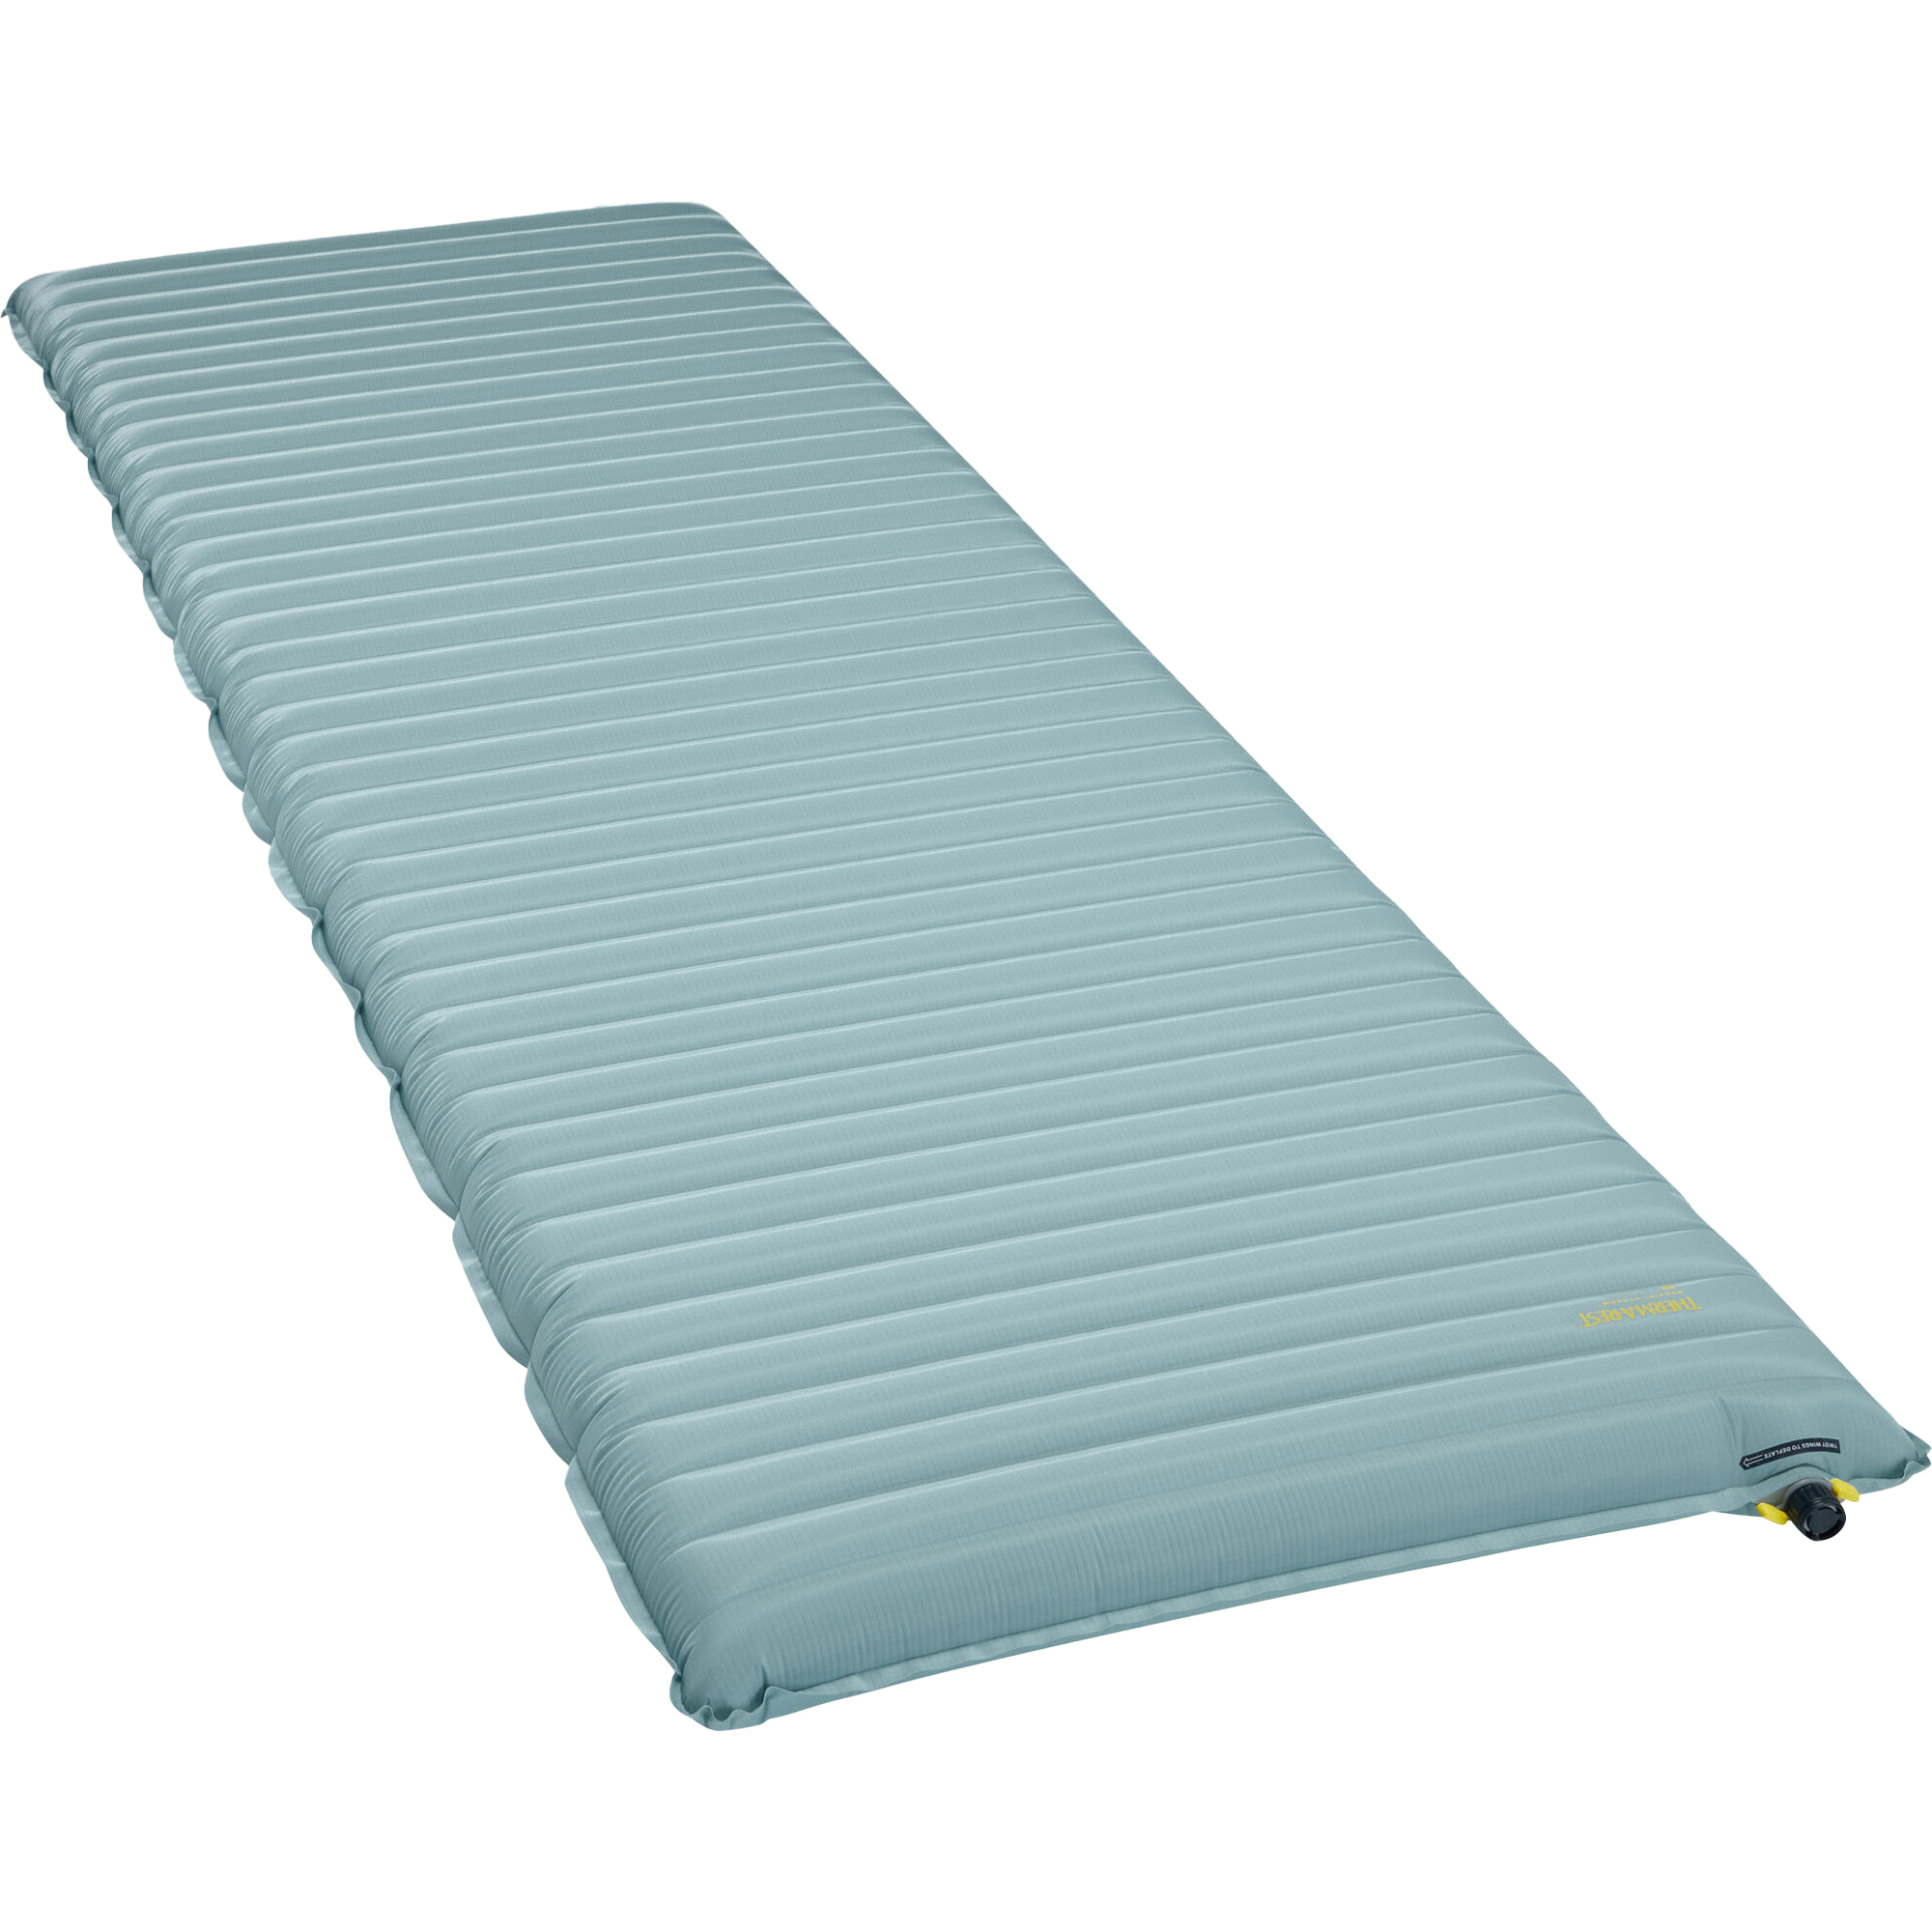 Photos - Camping Mat Therm-a-Rest ThermaRest NeoAir XTherm NXT MAX Insulated , L Neptune 11637 